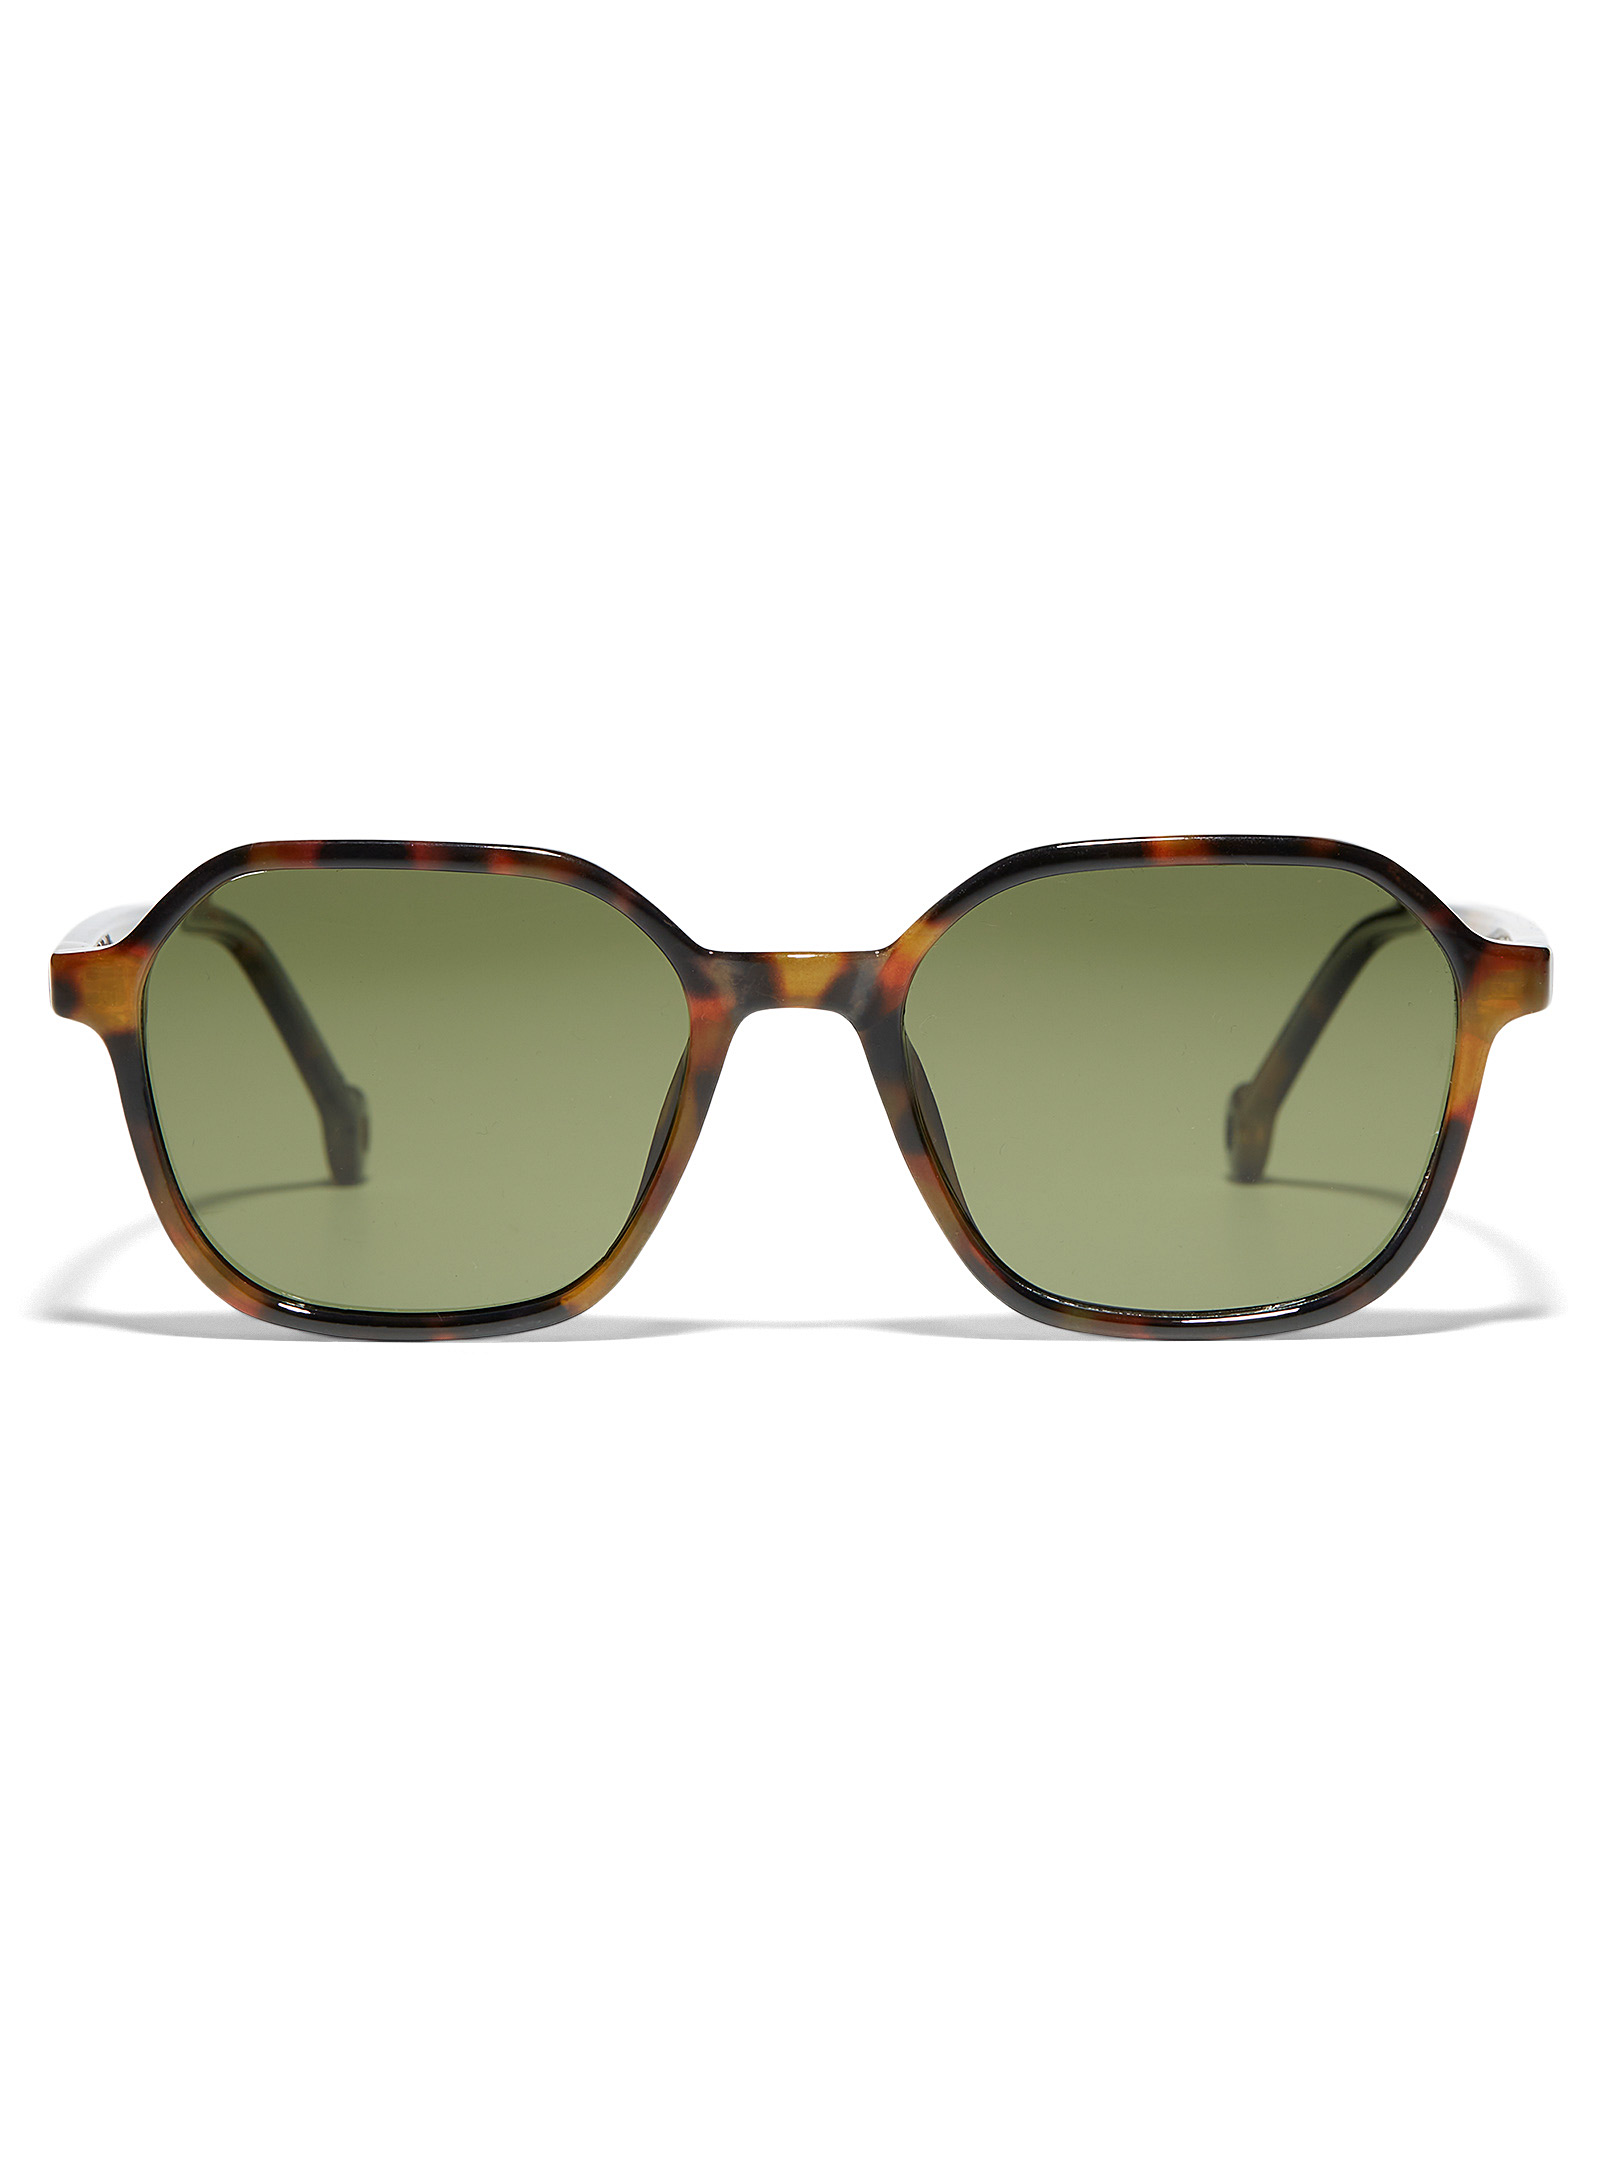 Parafina Valle Sunglasses In Light Brown